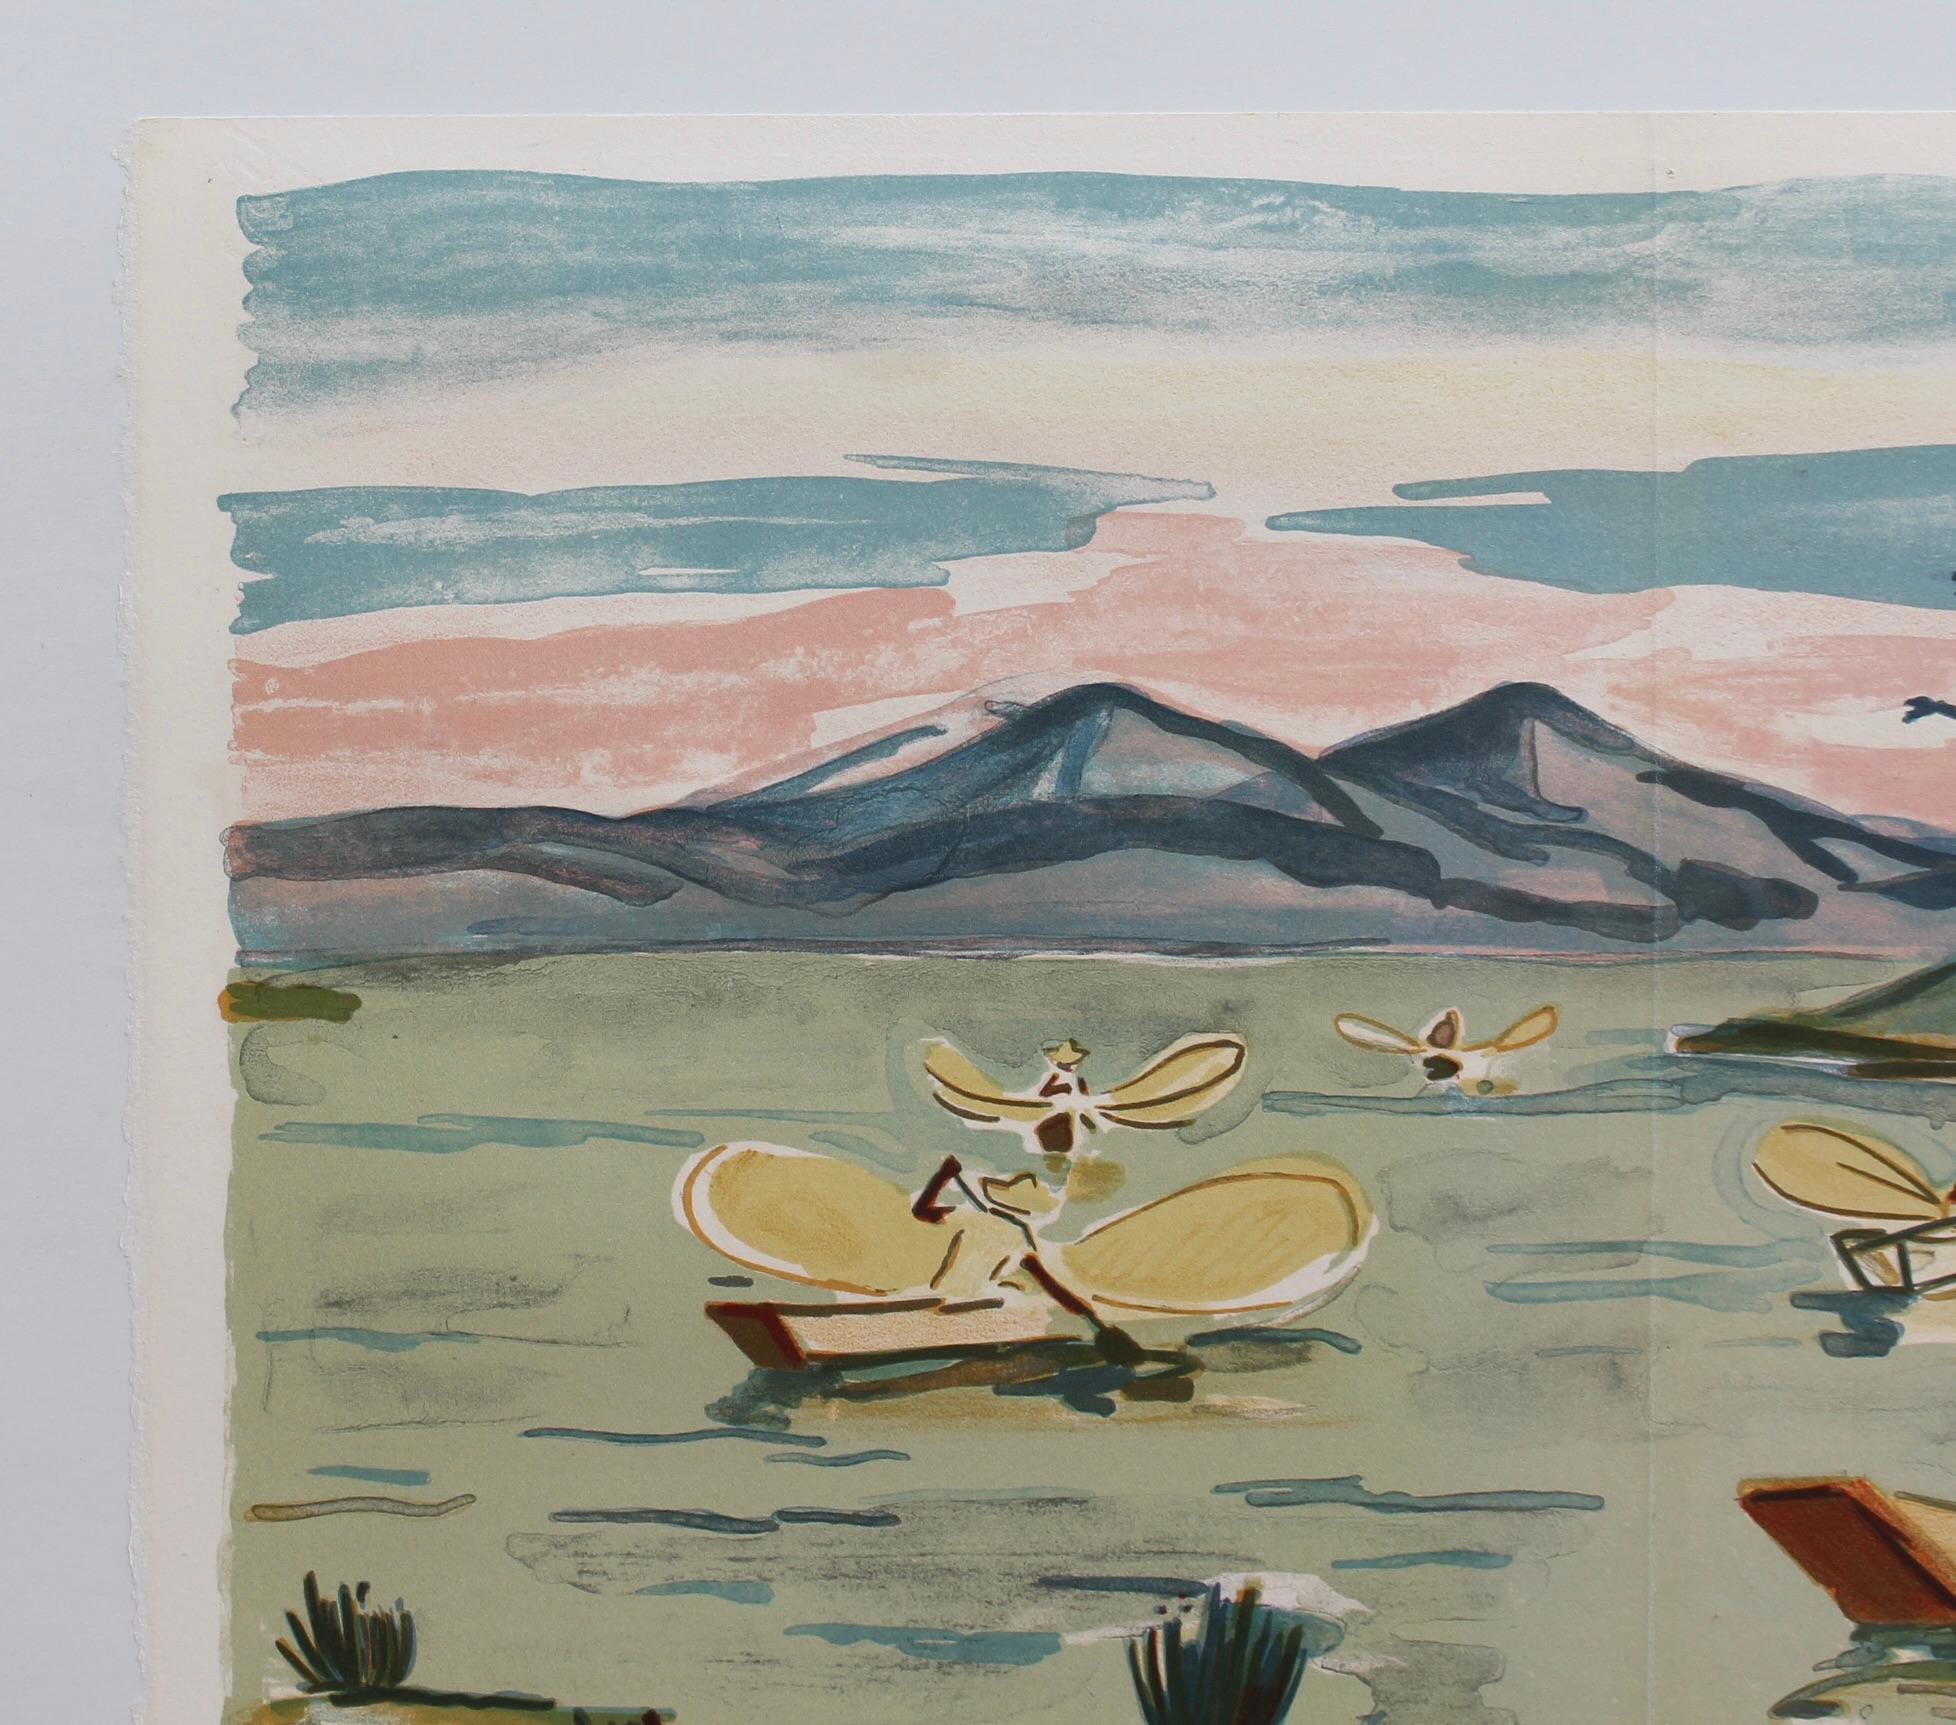 'Mexican Fishermen in Lake Patzcuaro', lithograph by Yves Brayer (1963). Unframed. The artist, Yves Brayer, spent time painting in Mexico in 1963, one of the many worldwide destinations to which he travelled with the intention of portraying life in